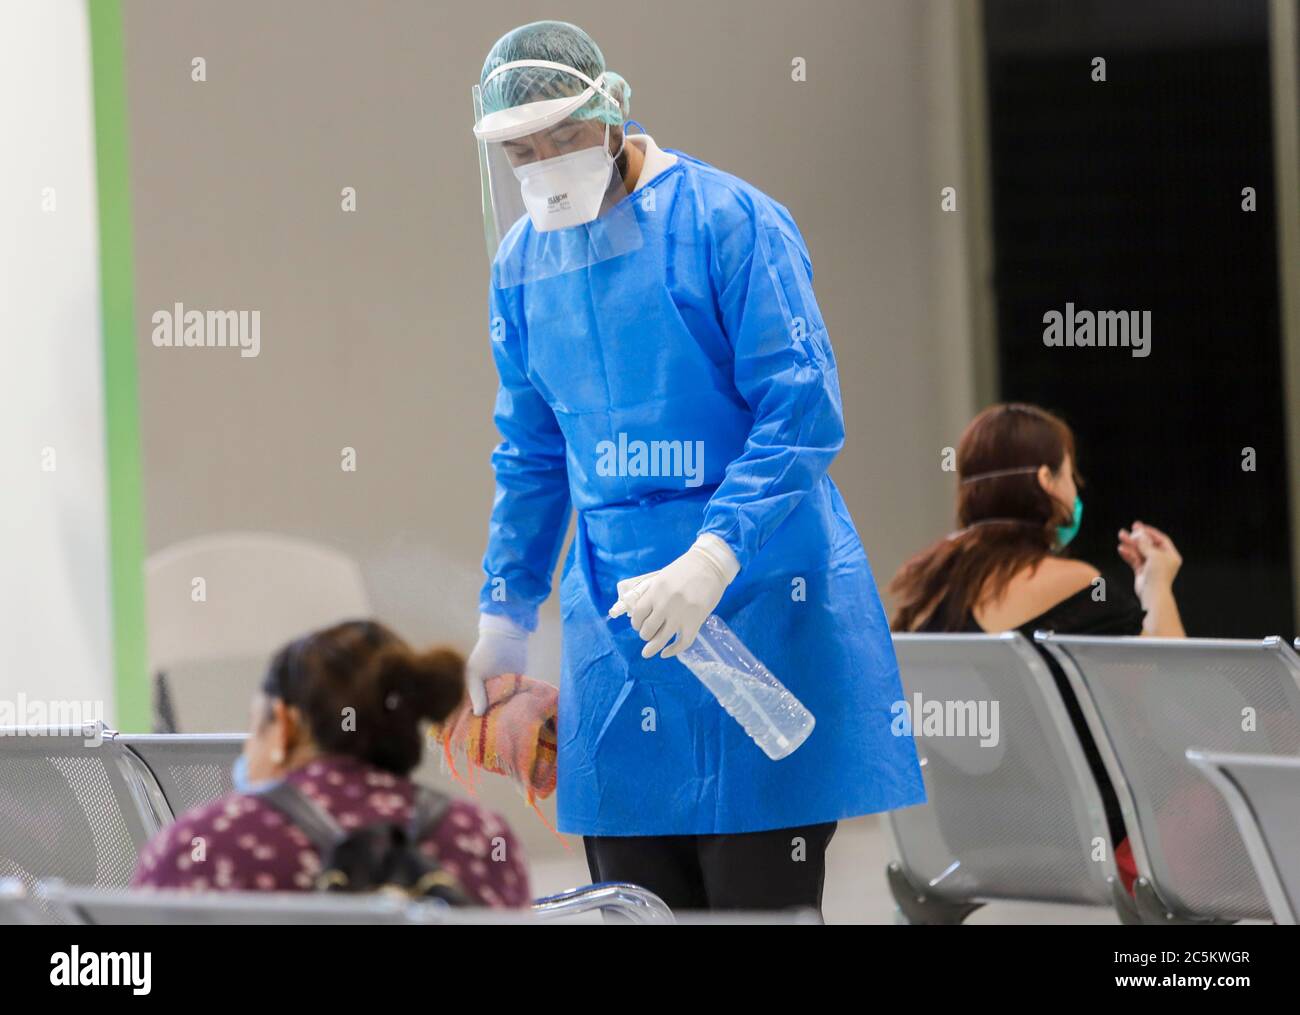 HERMOSILLO, MEXICO - JULY 3: Medical and health personnel carry out rapid tests and follow-up on people who present symptoms of covid-19 in the facilities of the Arena Sonora, which has led to the red alert due to the increase in cases in the state of Sonora on July 3, 2020 in Hermosillo, Mexico. (Luis Gutierrez / Norte Photo /) Sanitize, sanitizer, Sanitizar, sanitizante  HERMOSILLO, MEXICO - JULY 3: Medical and health personnel carry out rapid tests and follow-up on people who present symptoms of covid-19 in the facilities of the Arena Sonora, which has led to the red alert due to the increa Stock Photo